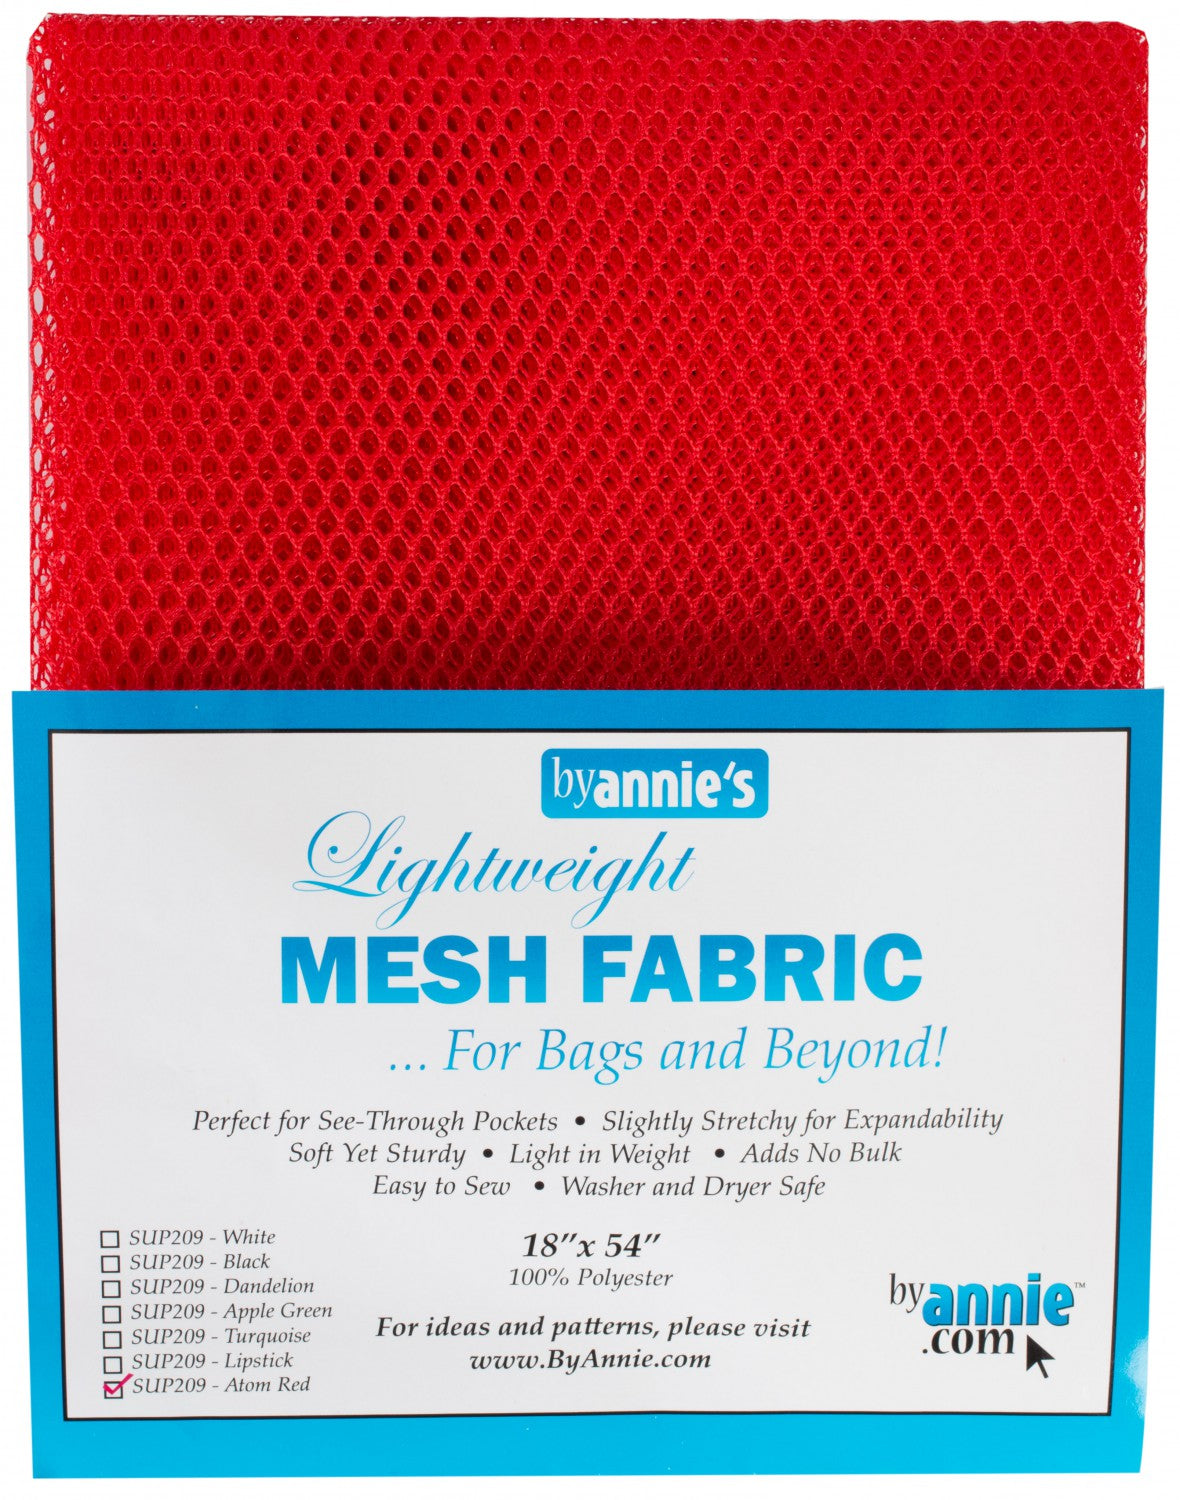 Mesh Fabric Lightweight 18"x 54" Atomic Red - By Annie